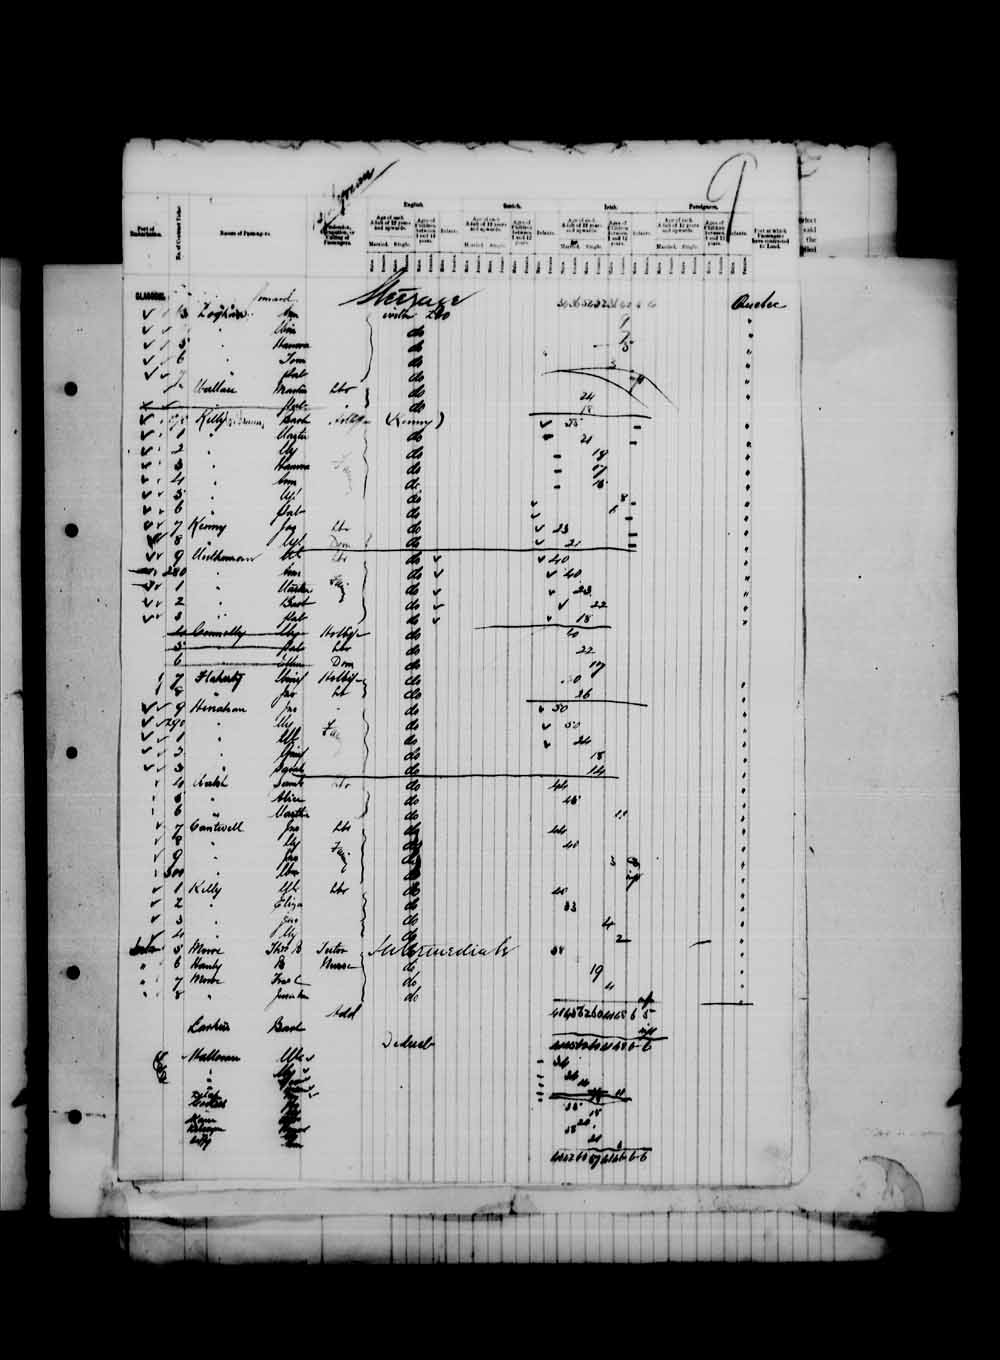 Digitized page of Passenger Lists for Image No.: e003542788